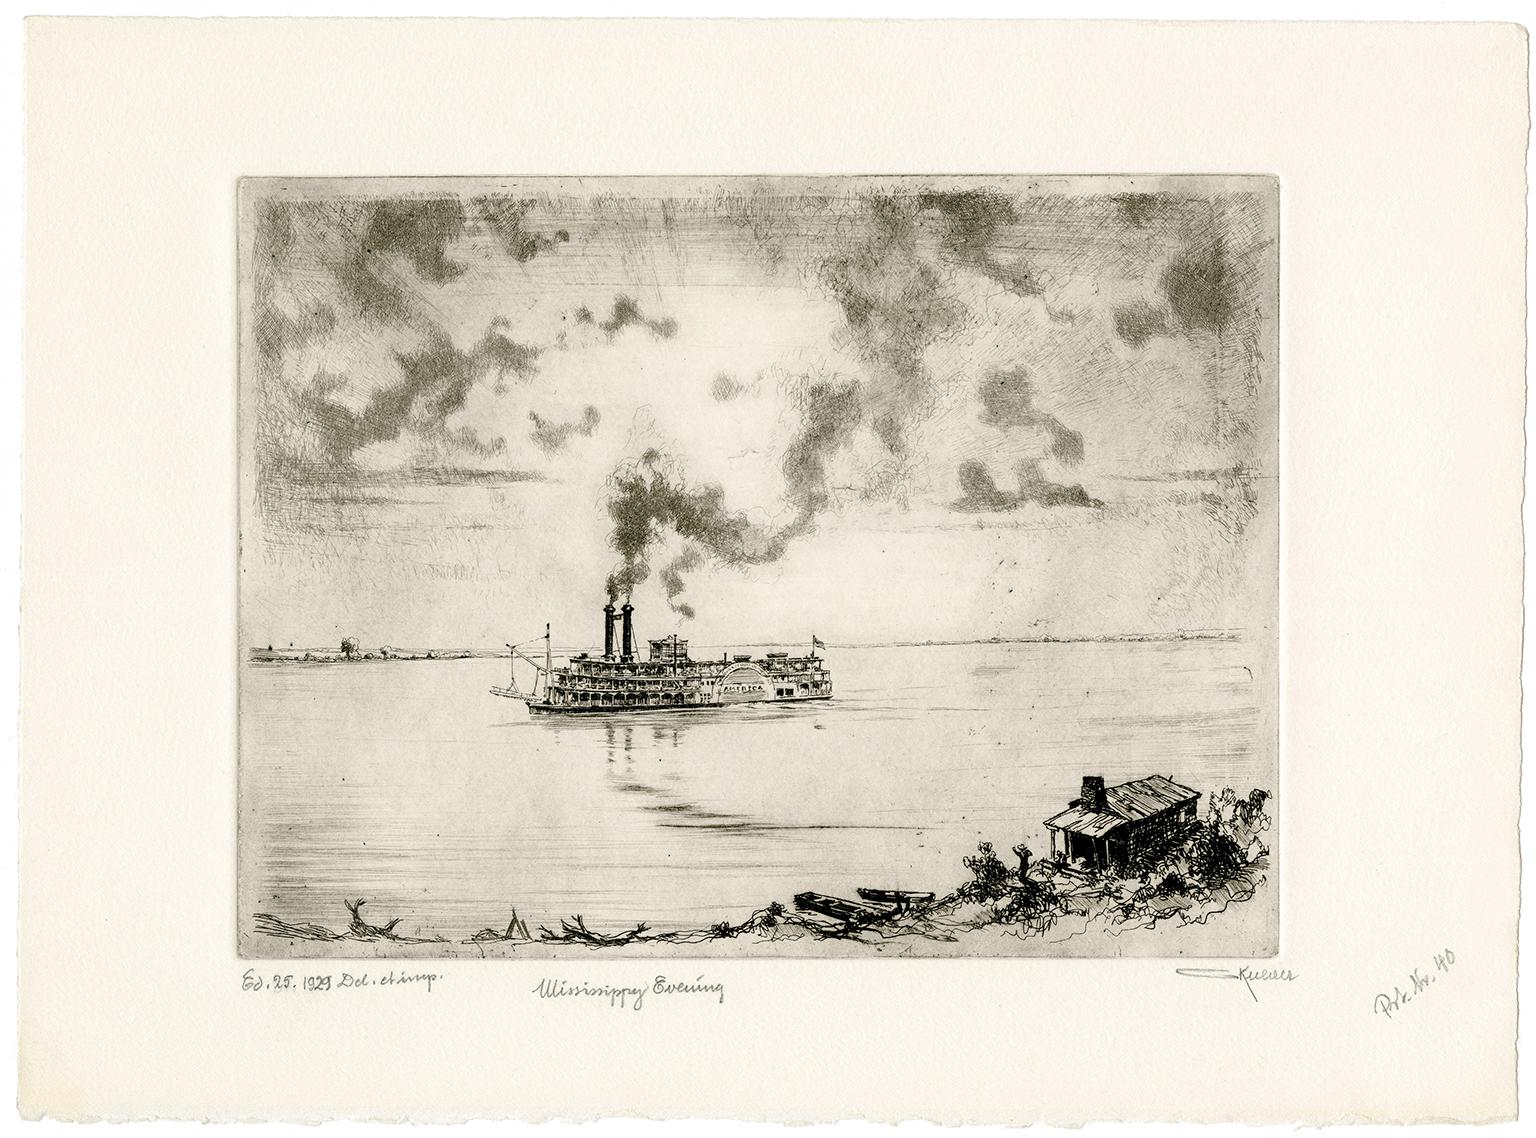 Mississippi Evening - Print by Otto Kuhler